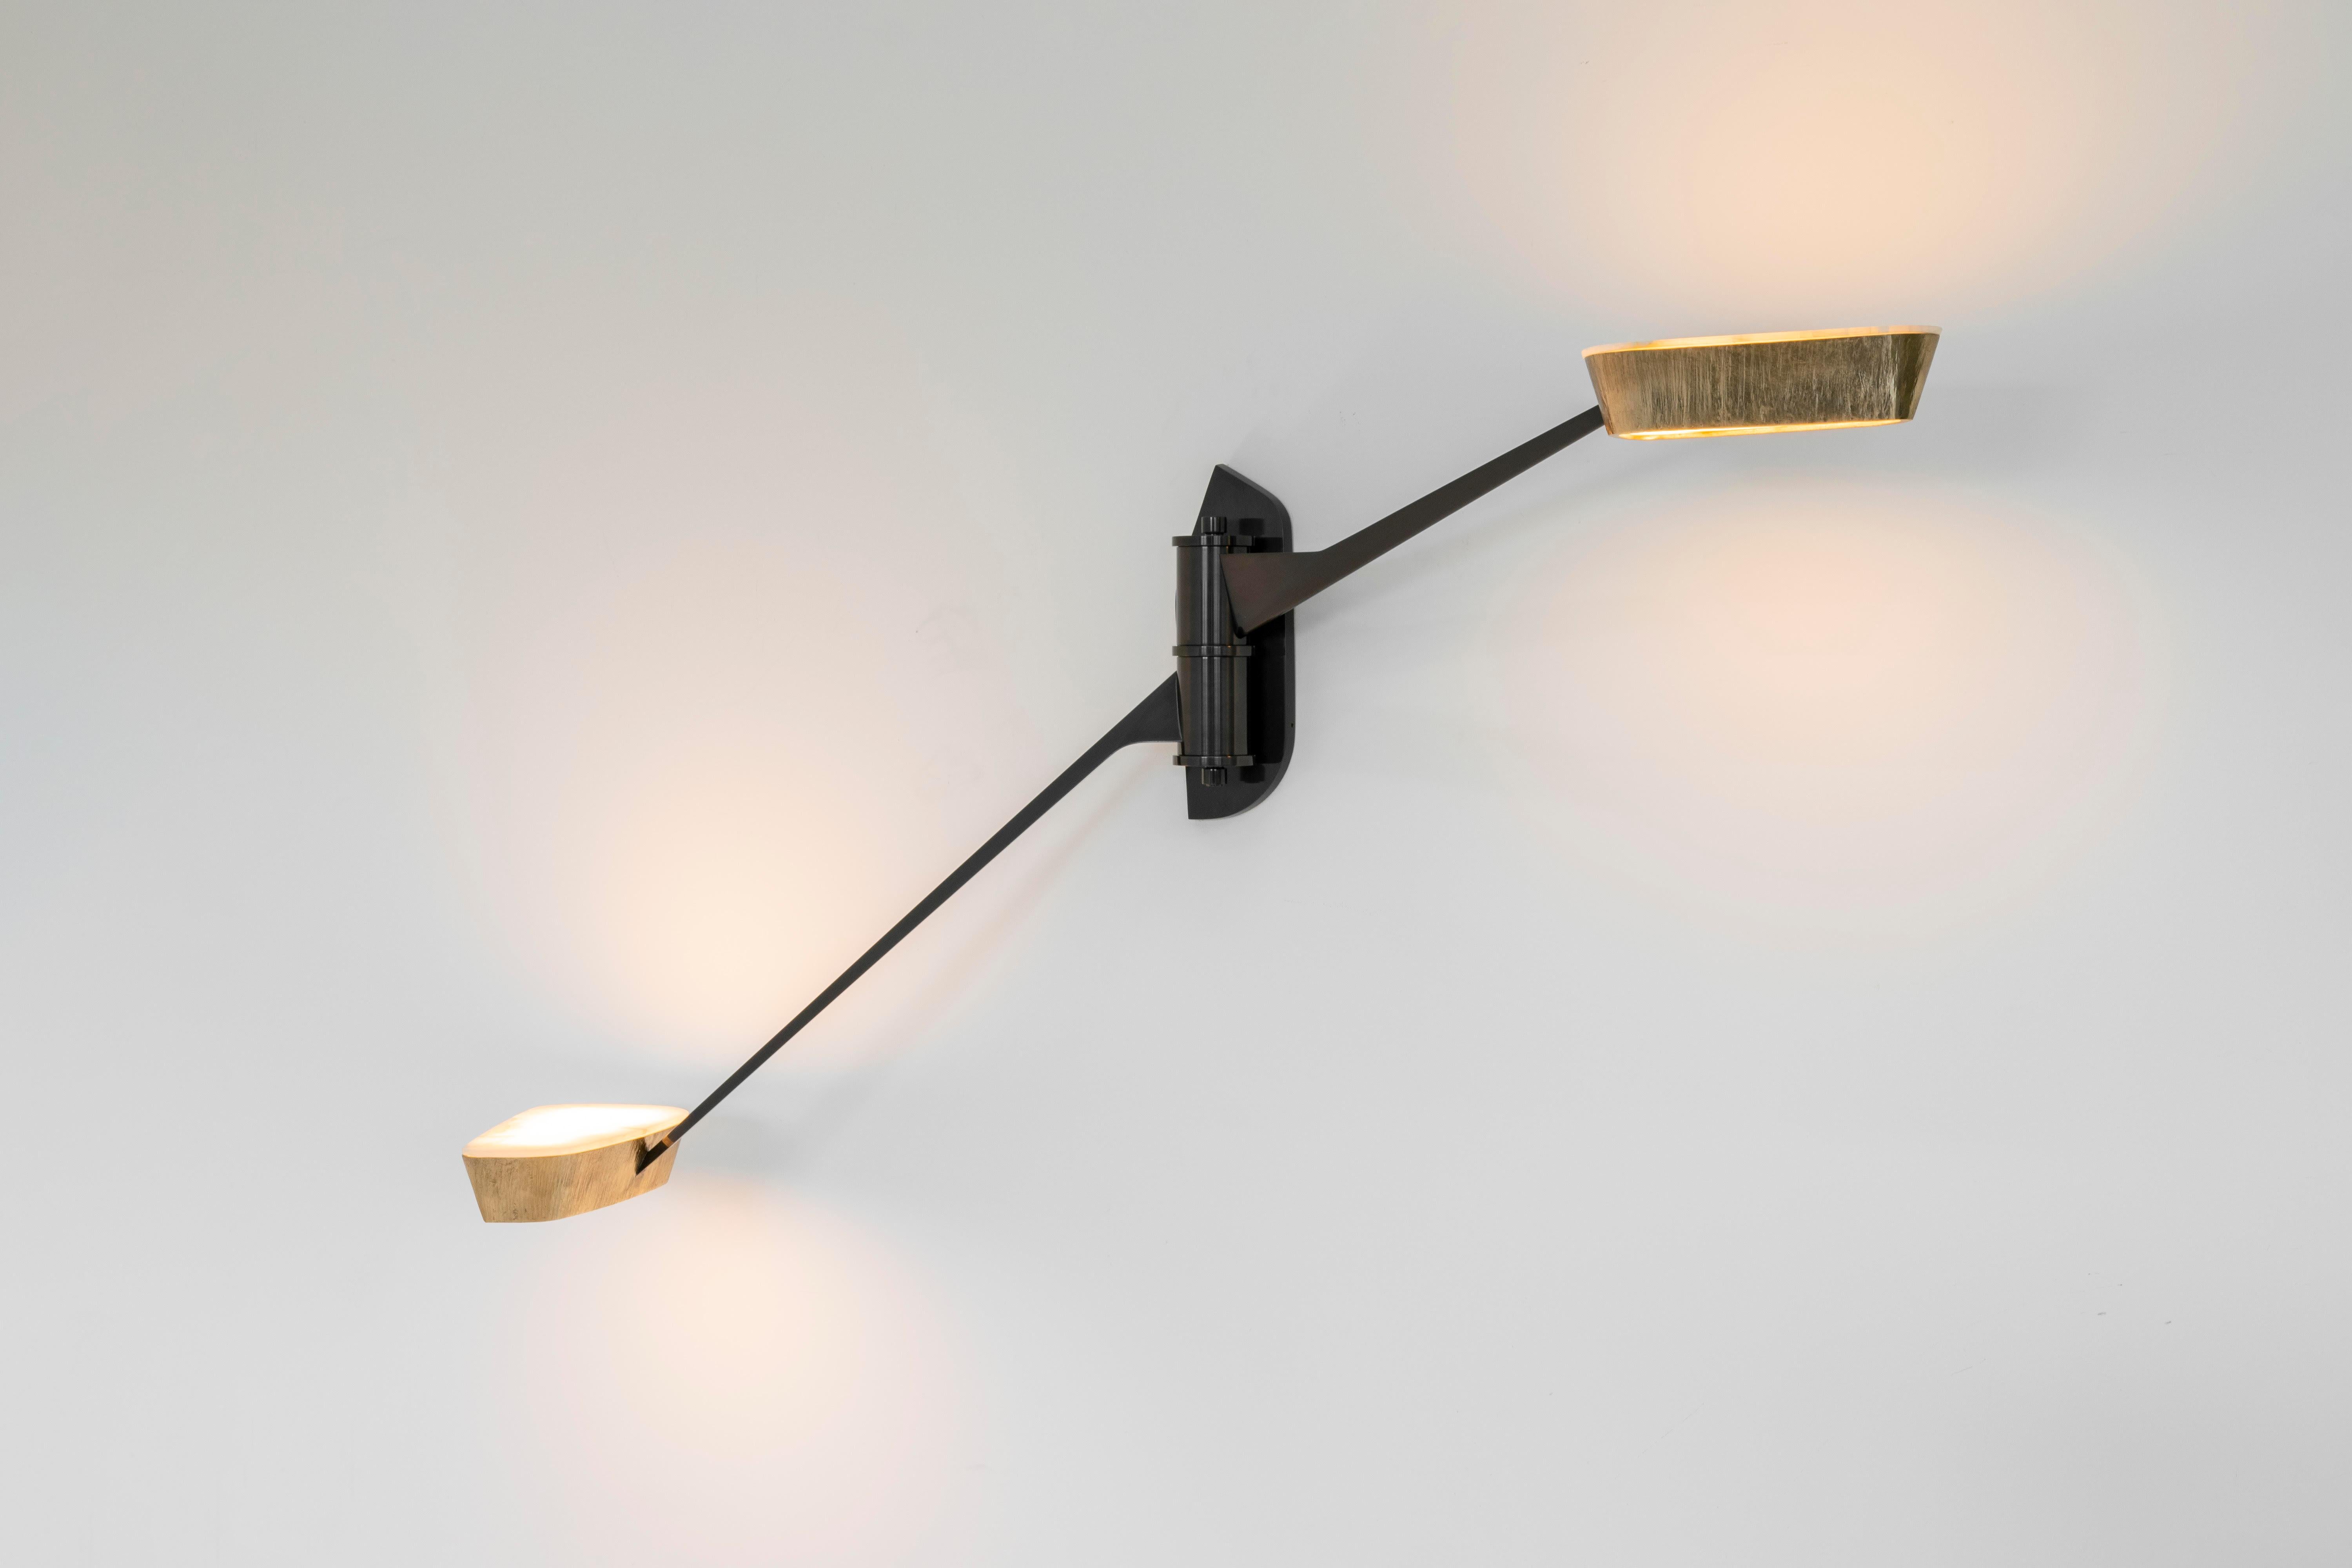 Vatulele, a two arm sconce in the vein of Salvagni's wildly popular Spider, features a pair gunmetal patinated bronze arms, accented at their ends with shades of polished bronze and onyx. The two reach out, each at its own height, and swivel,